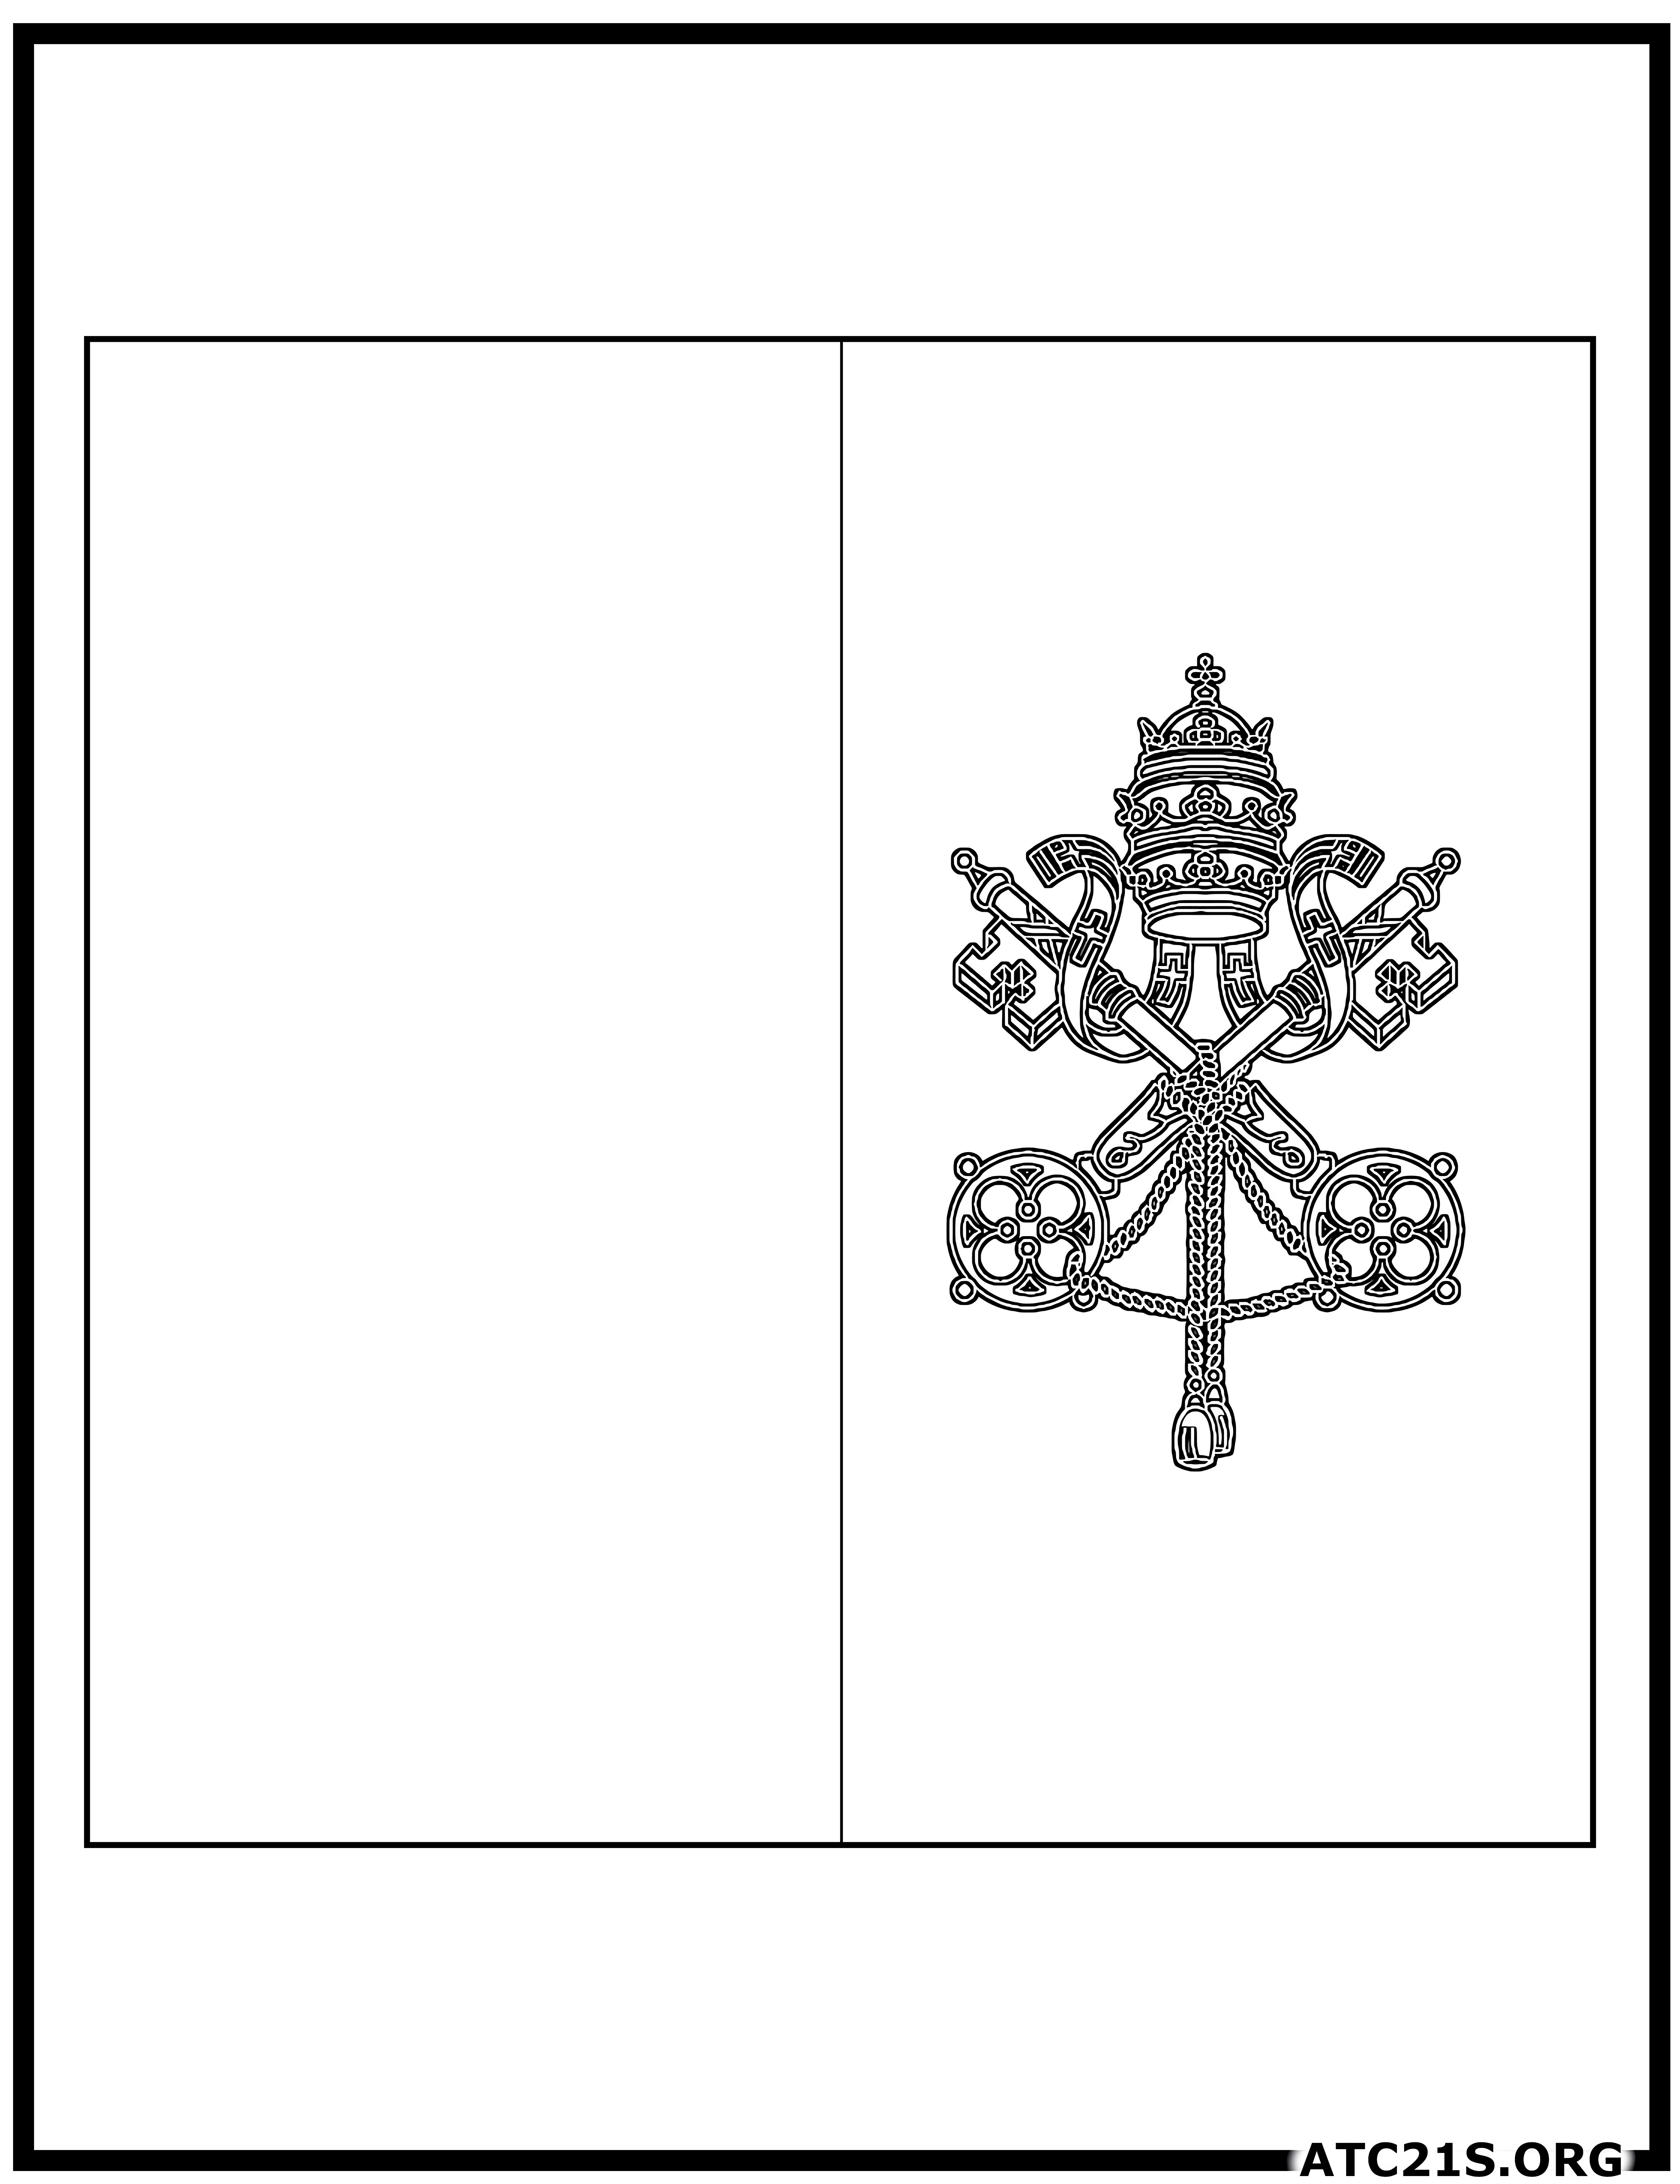 Vatican City_flag_coloring_page